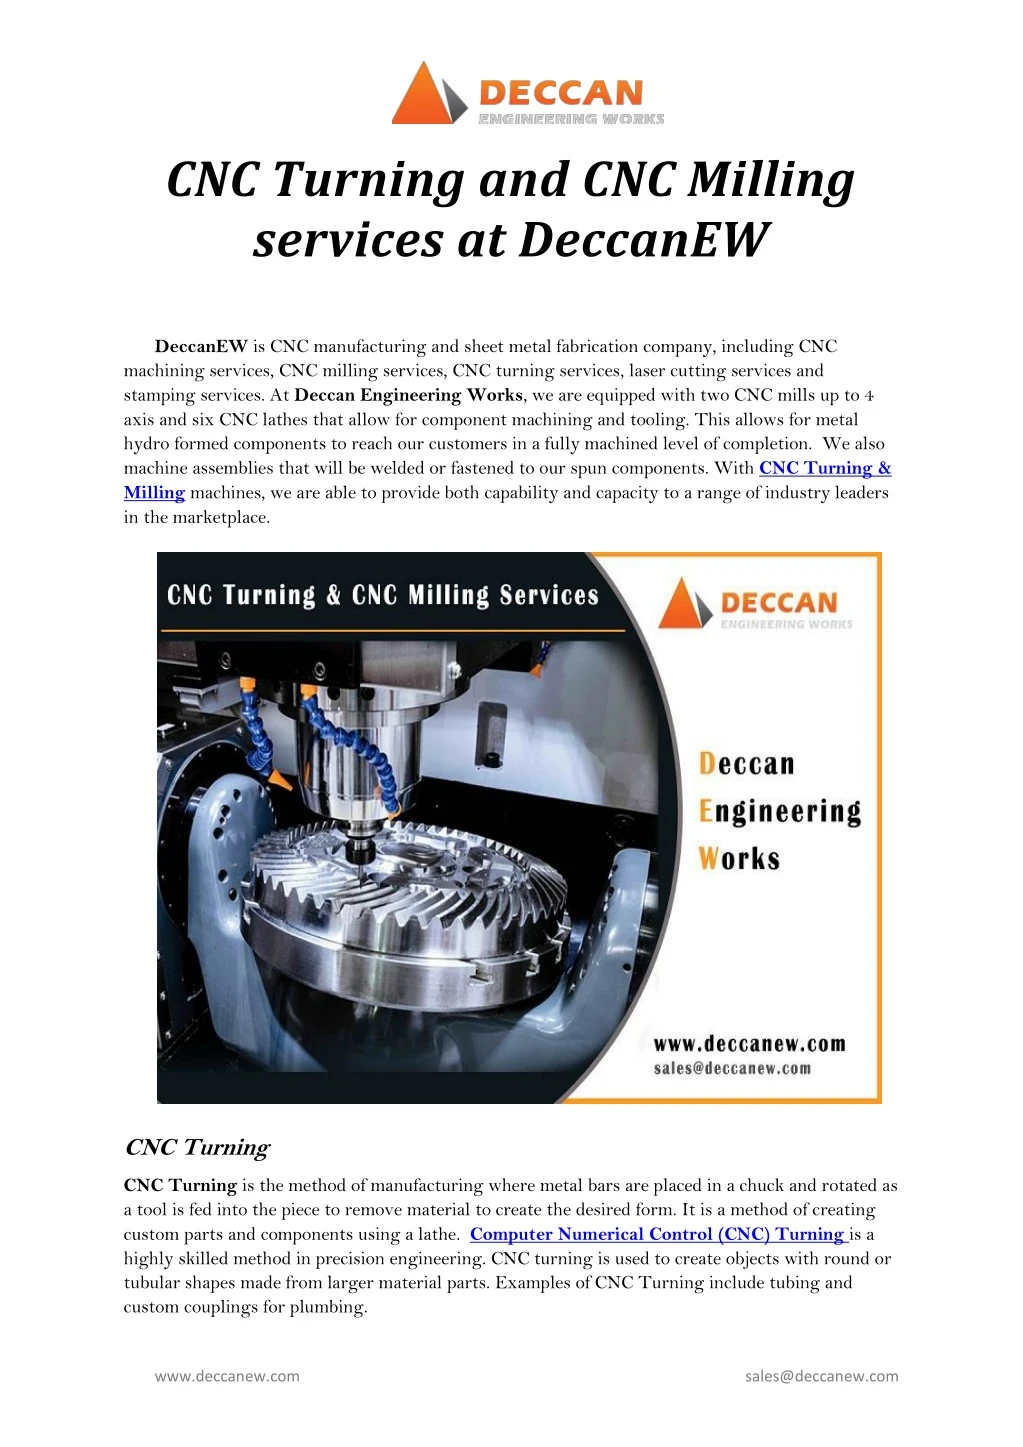 cnc turning and cnc milling services at deccanew